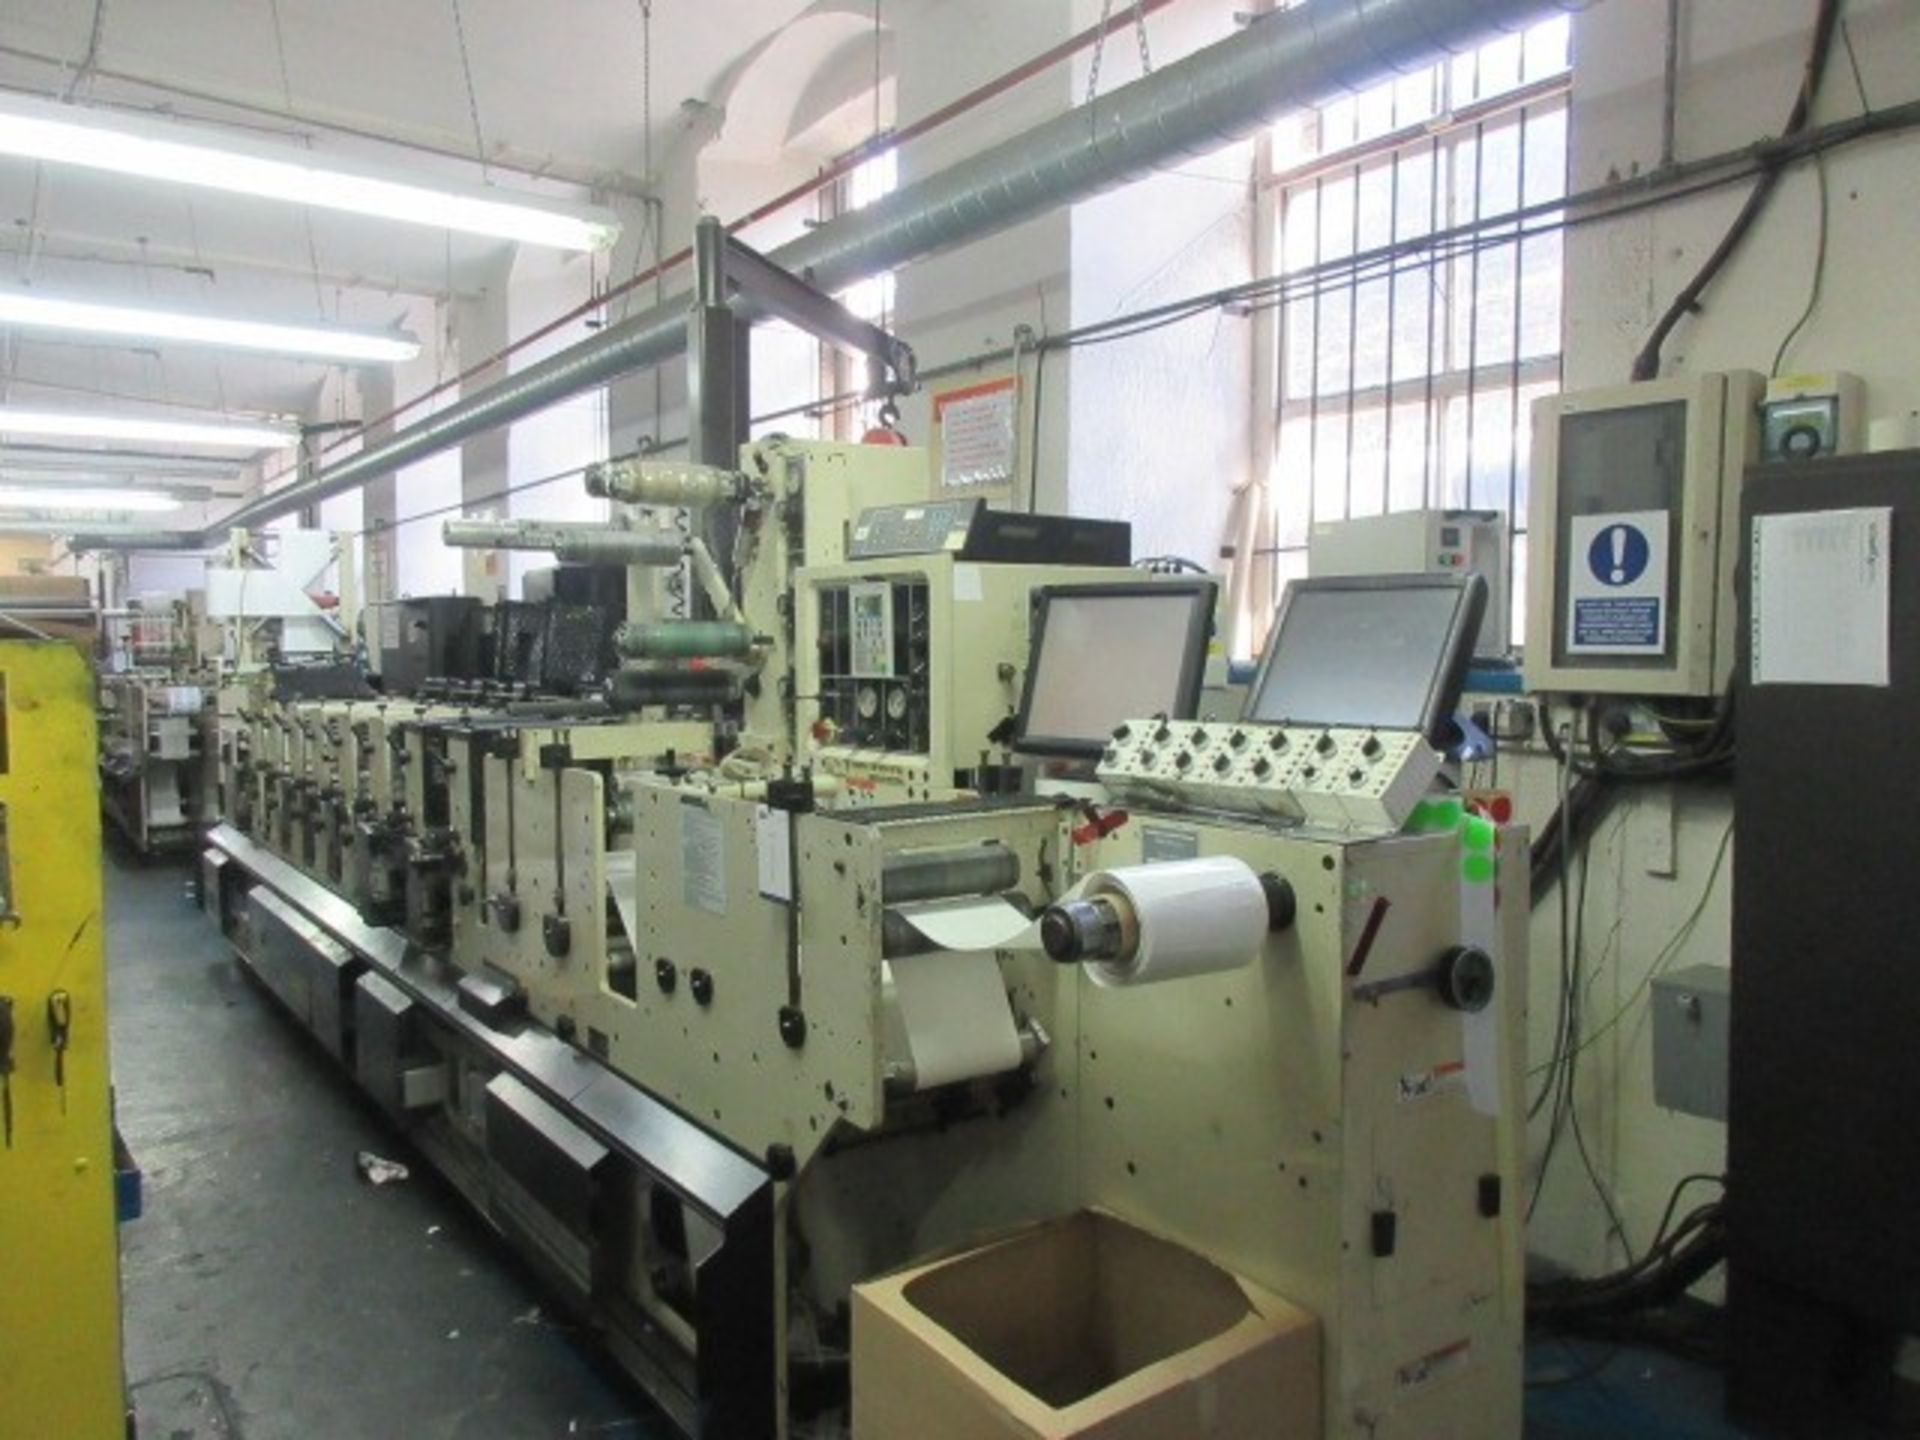 Mark Andy 2200-10F 10” 8 colour flexographic label printing press. Serial no: 1260086 (2002) - Image 100 of 383